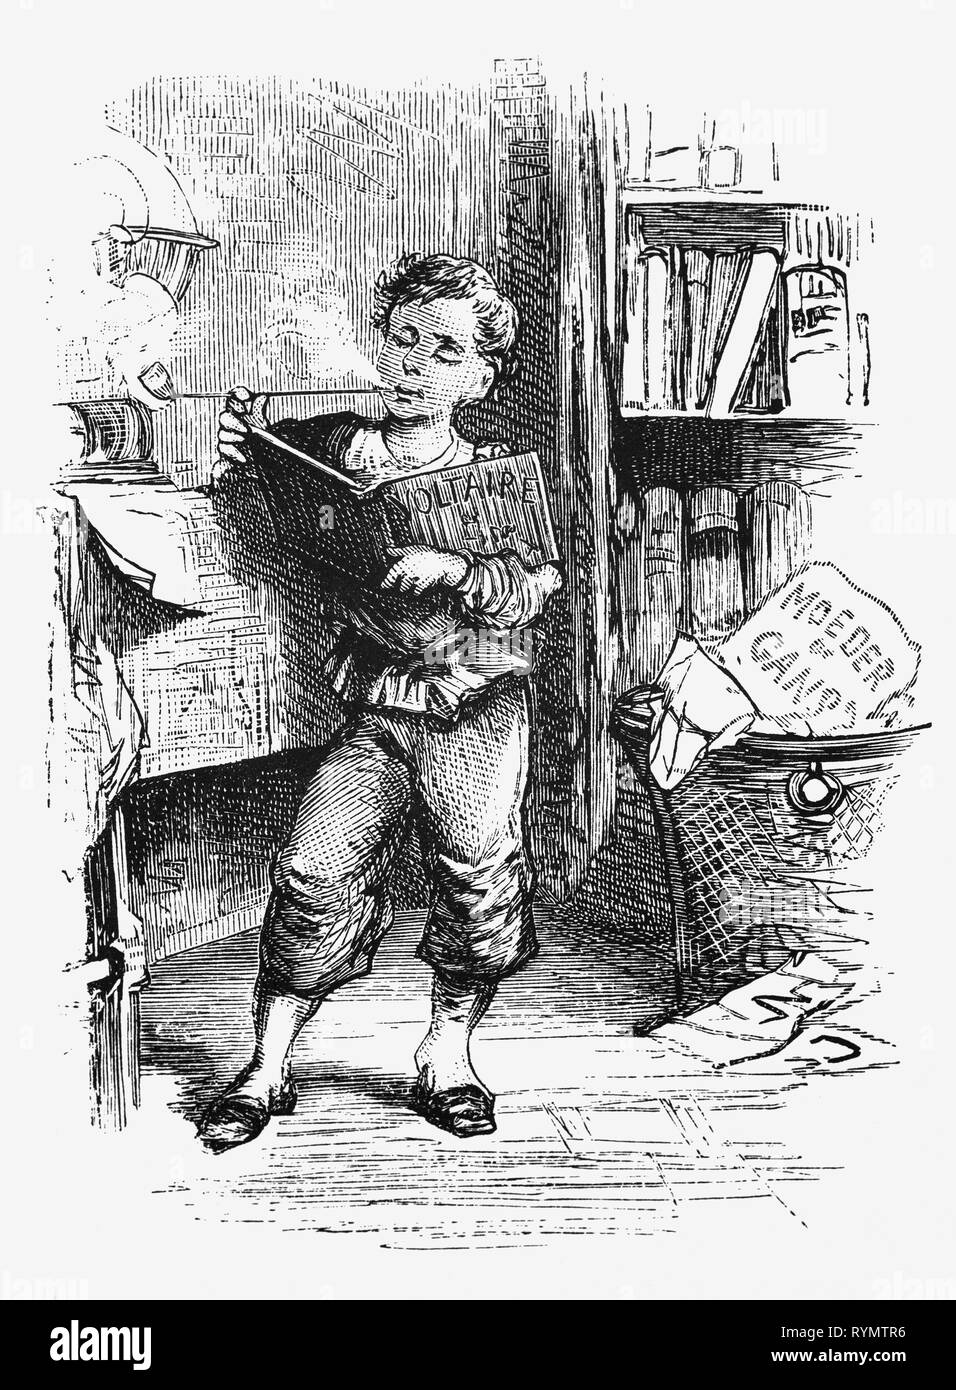 A young boy, dumps his childrens books and starts reading Voltaire and smoking a pipe. From the Camera Obscura, a 19th Century collection of Dutch humorous-realistic essays, stories and sketches in which Hildebrand, the author, takes an ironic look at the behavior of the 'well-to-do', finding  them bourgeois and without a good word for them. Stock Photo